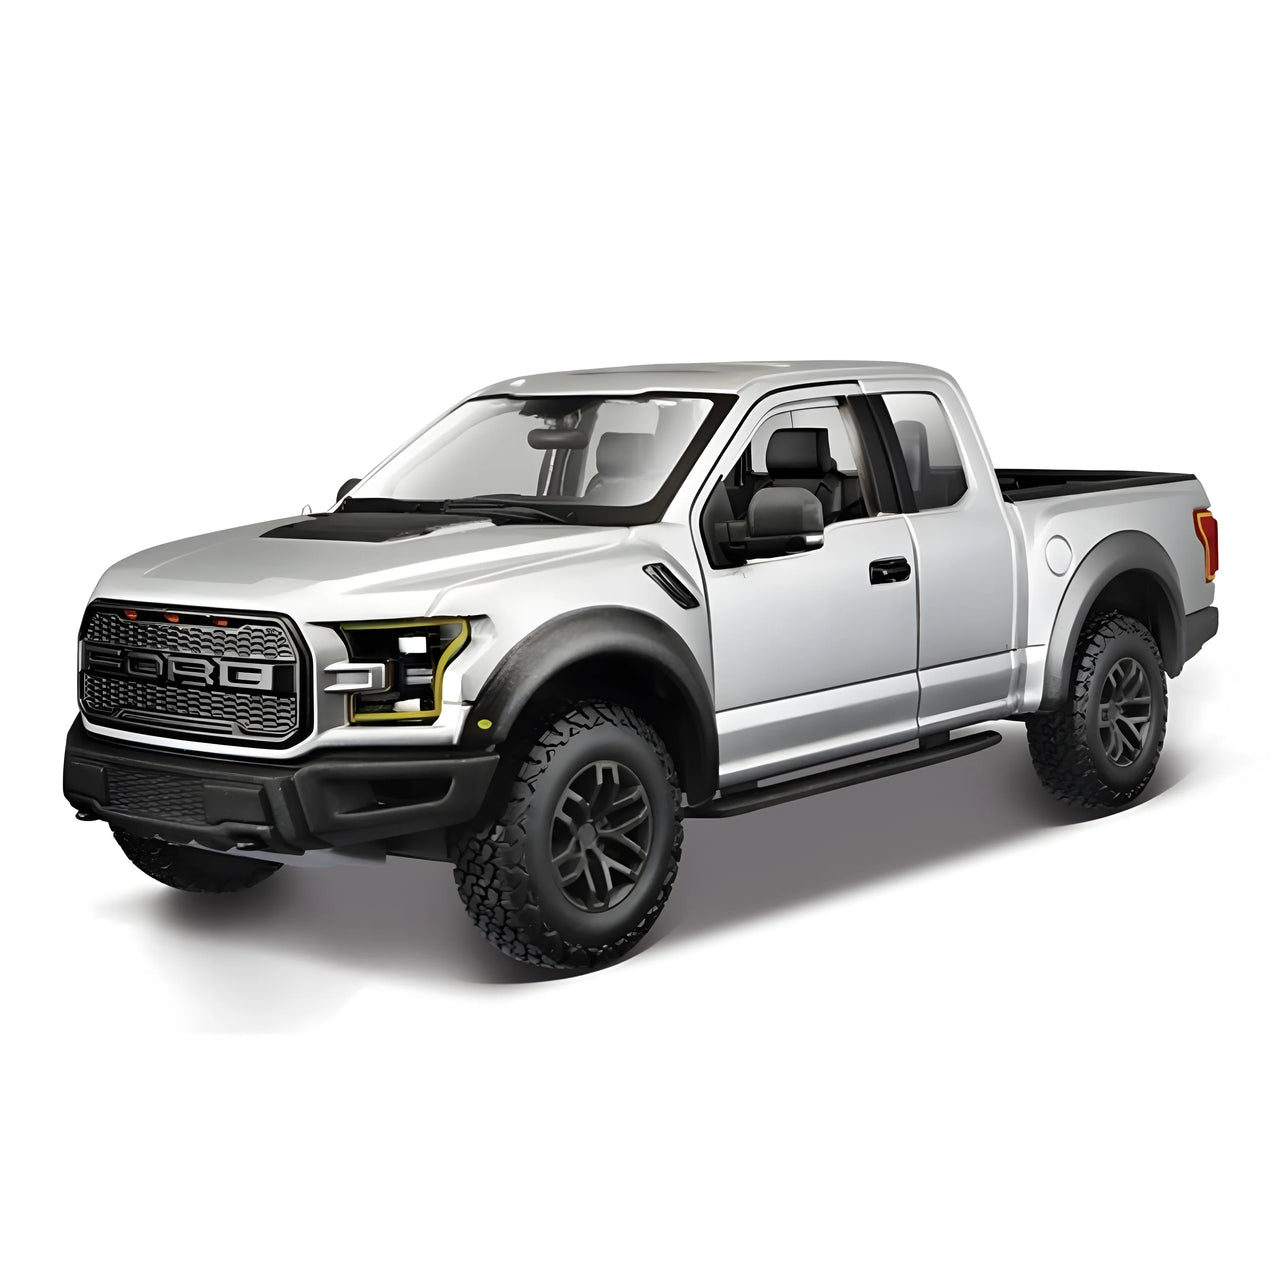 31266MGY Ford F150 2017 Raptor Truck Scale 1:24